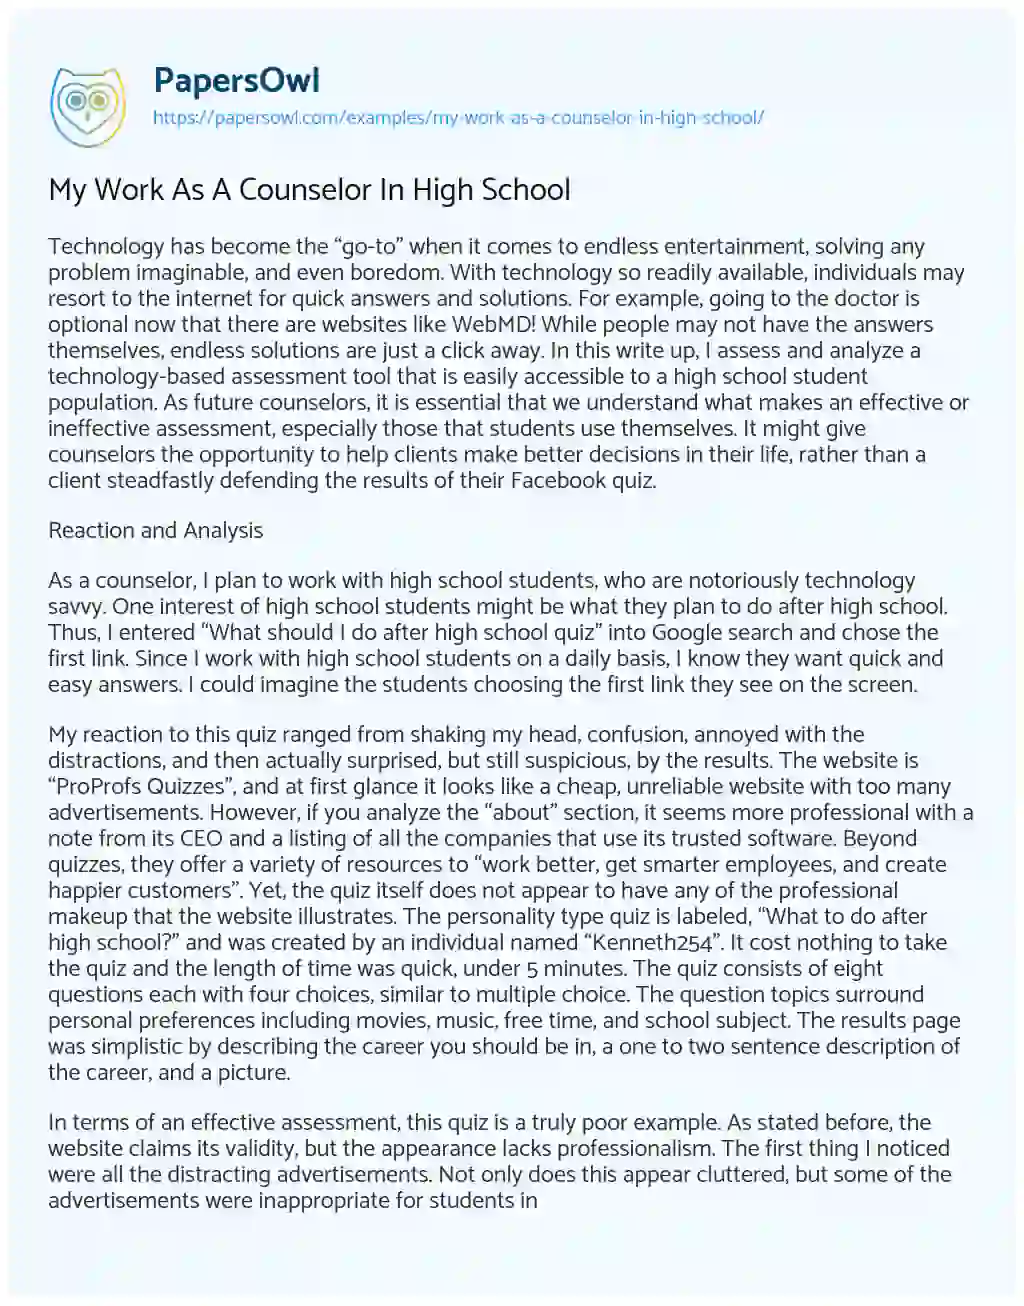 Essay on My Work as a Counselor in High School